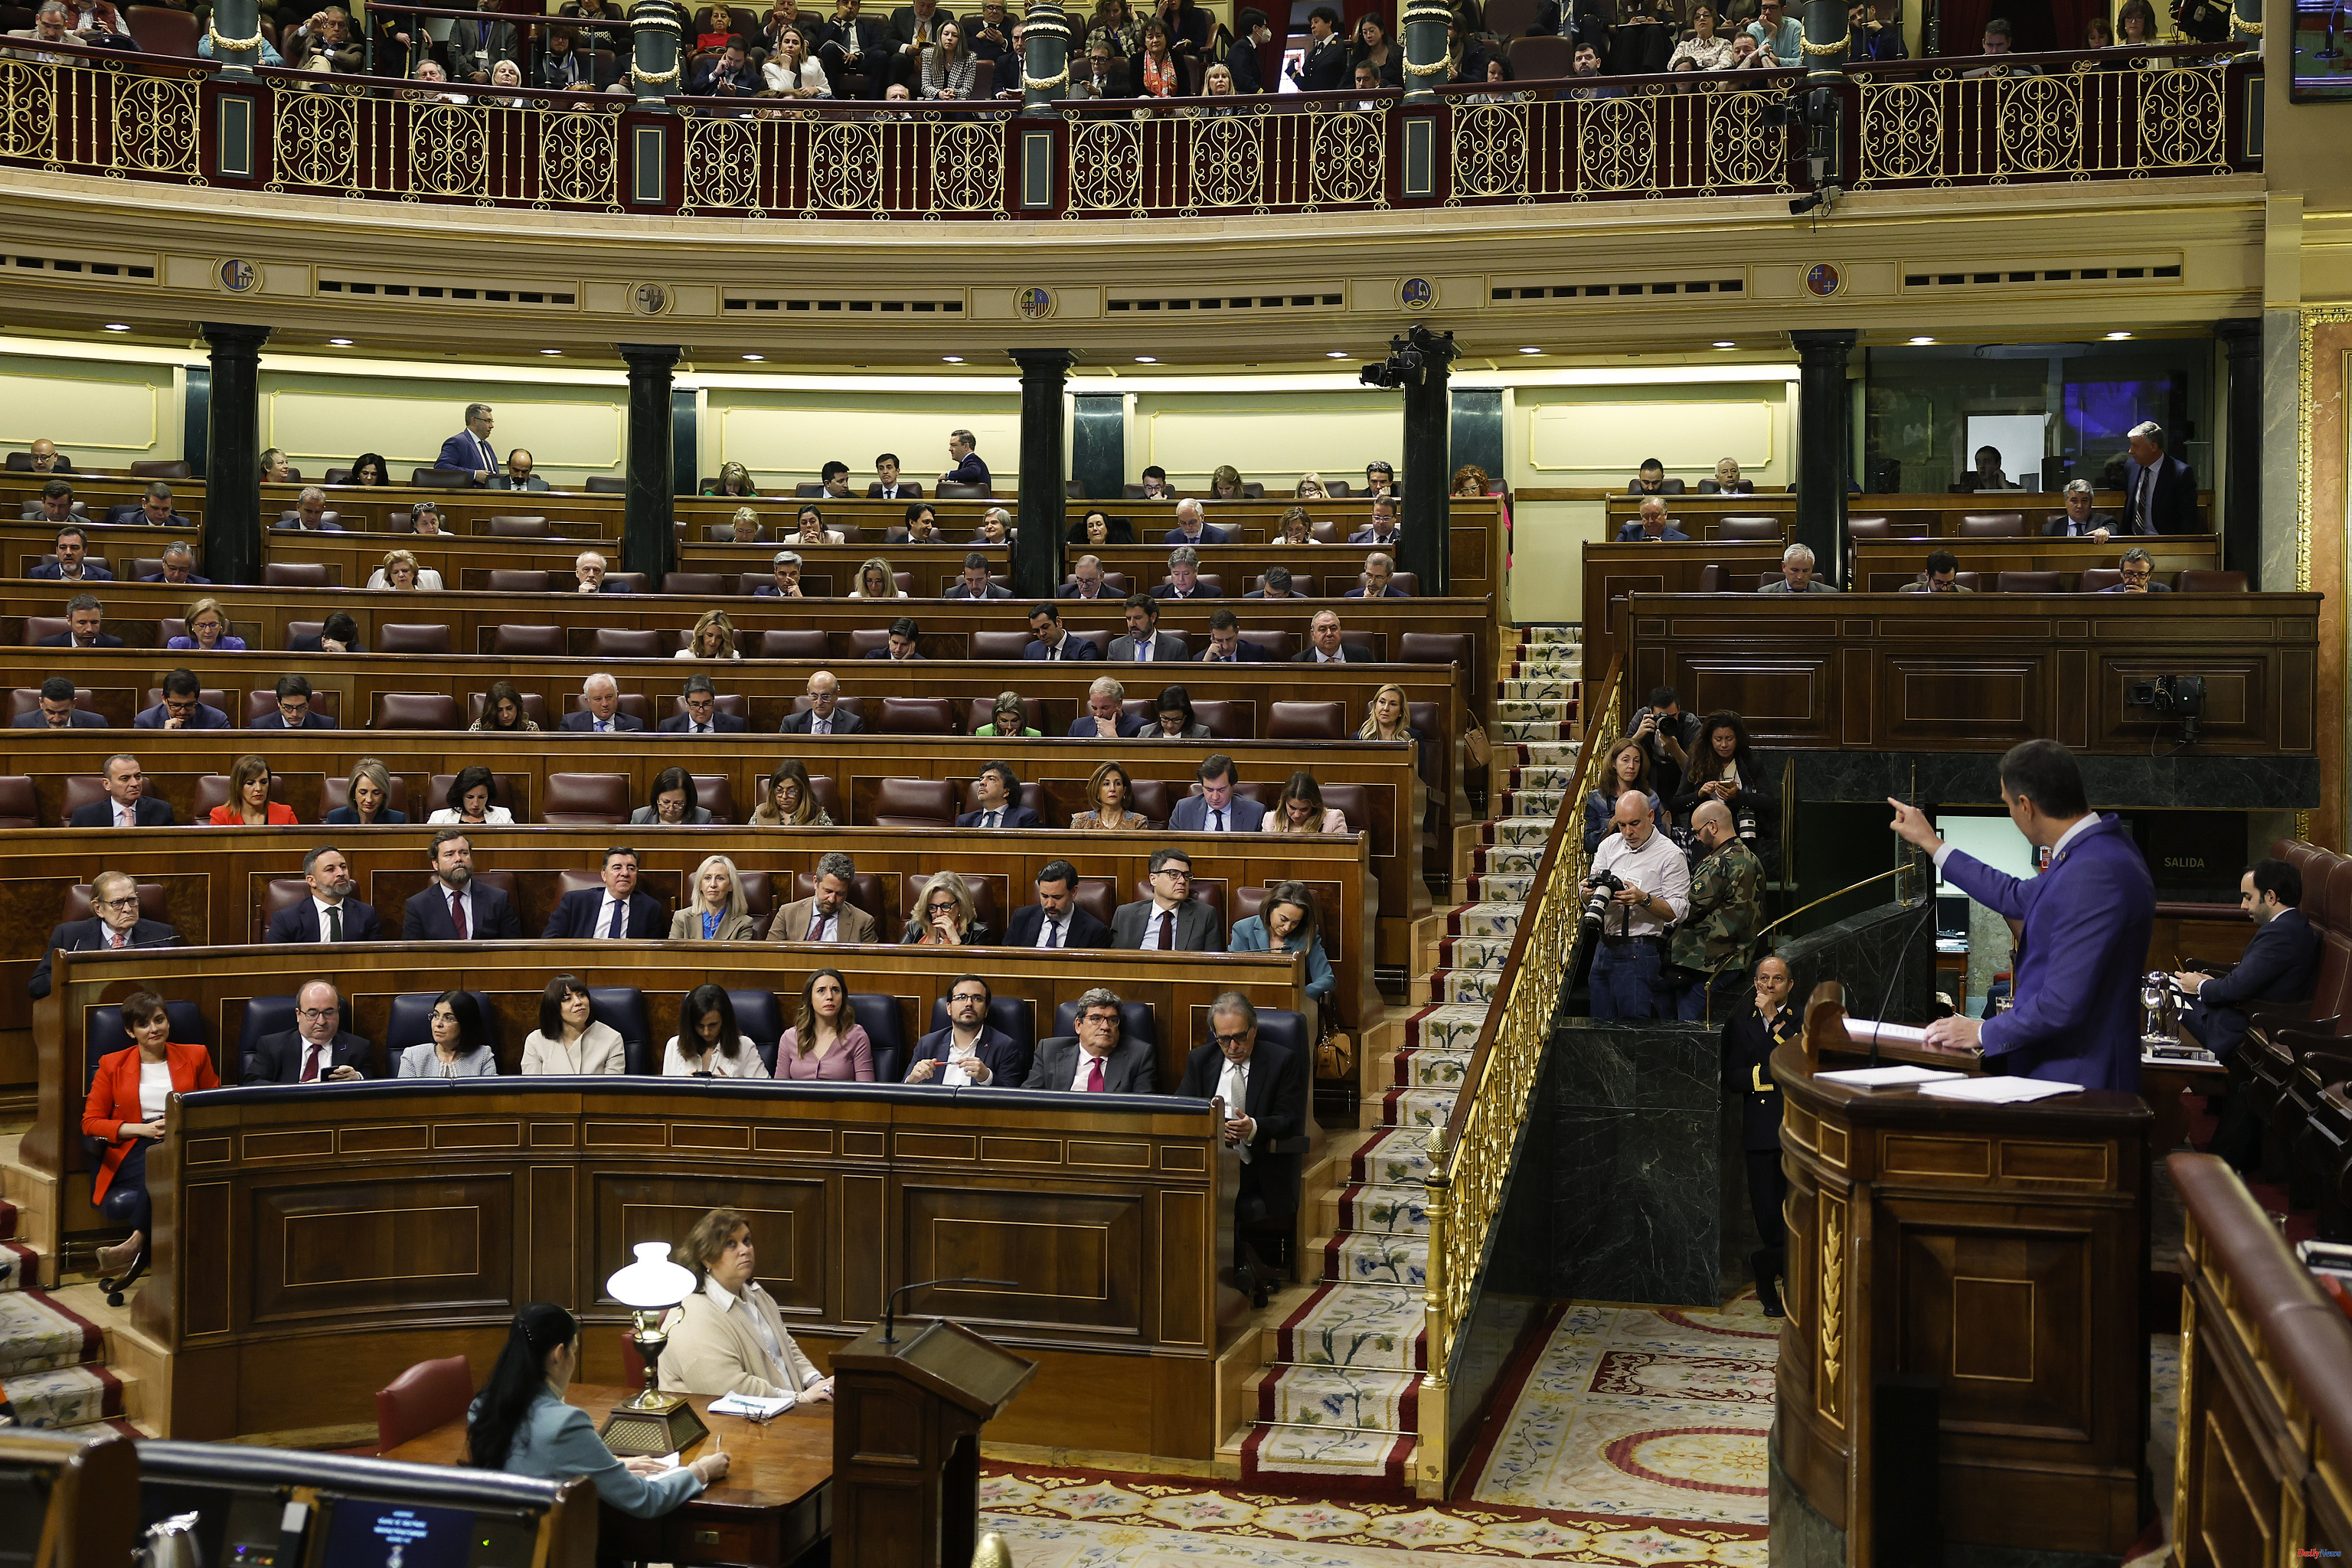 Spain When the motion of no confidence is voted on, what votes do they need and when does it end?